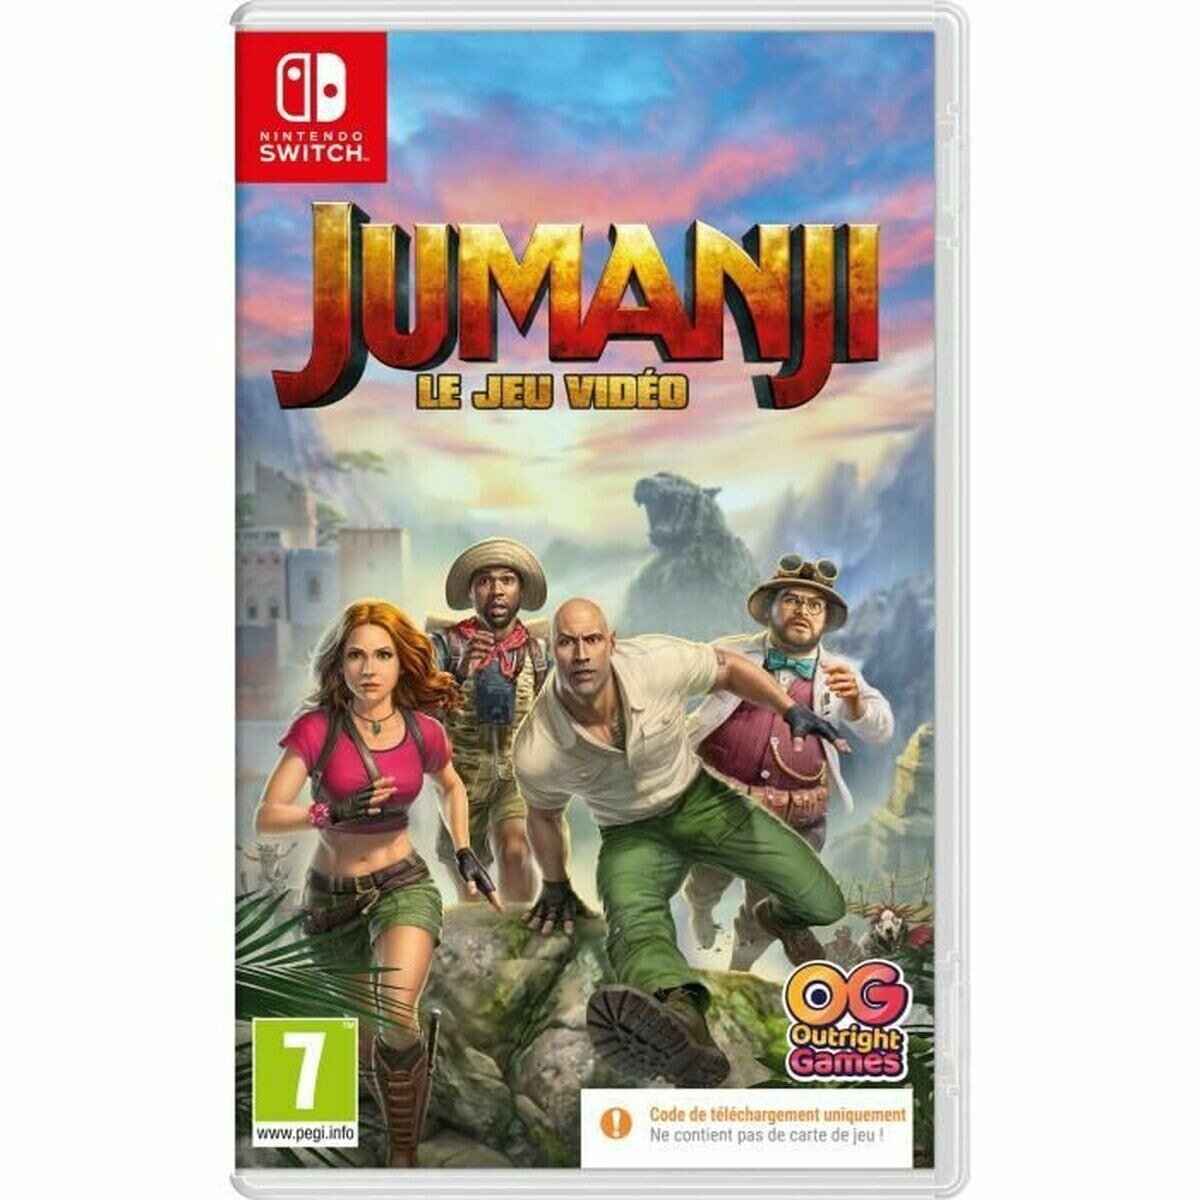 Video game for Switch Outright Games Jumanji The Video Game Download code